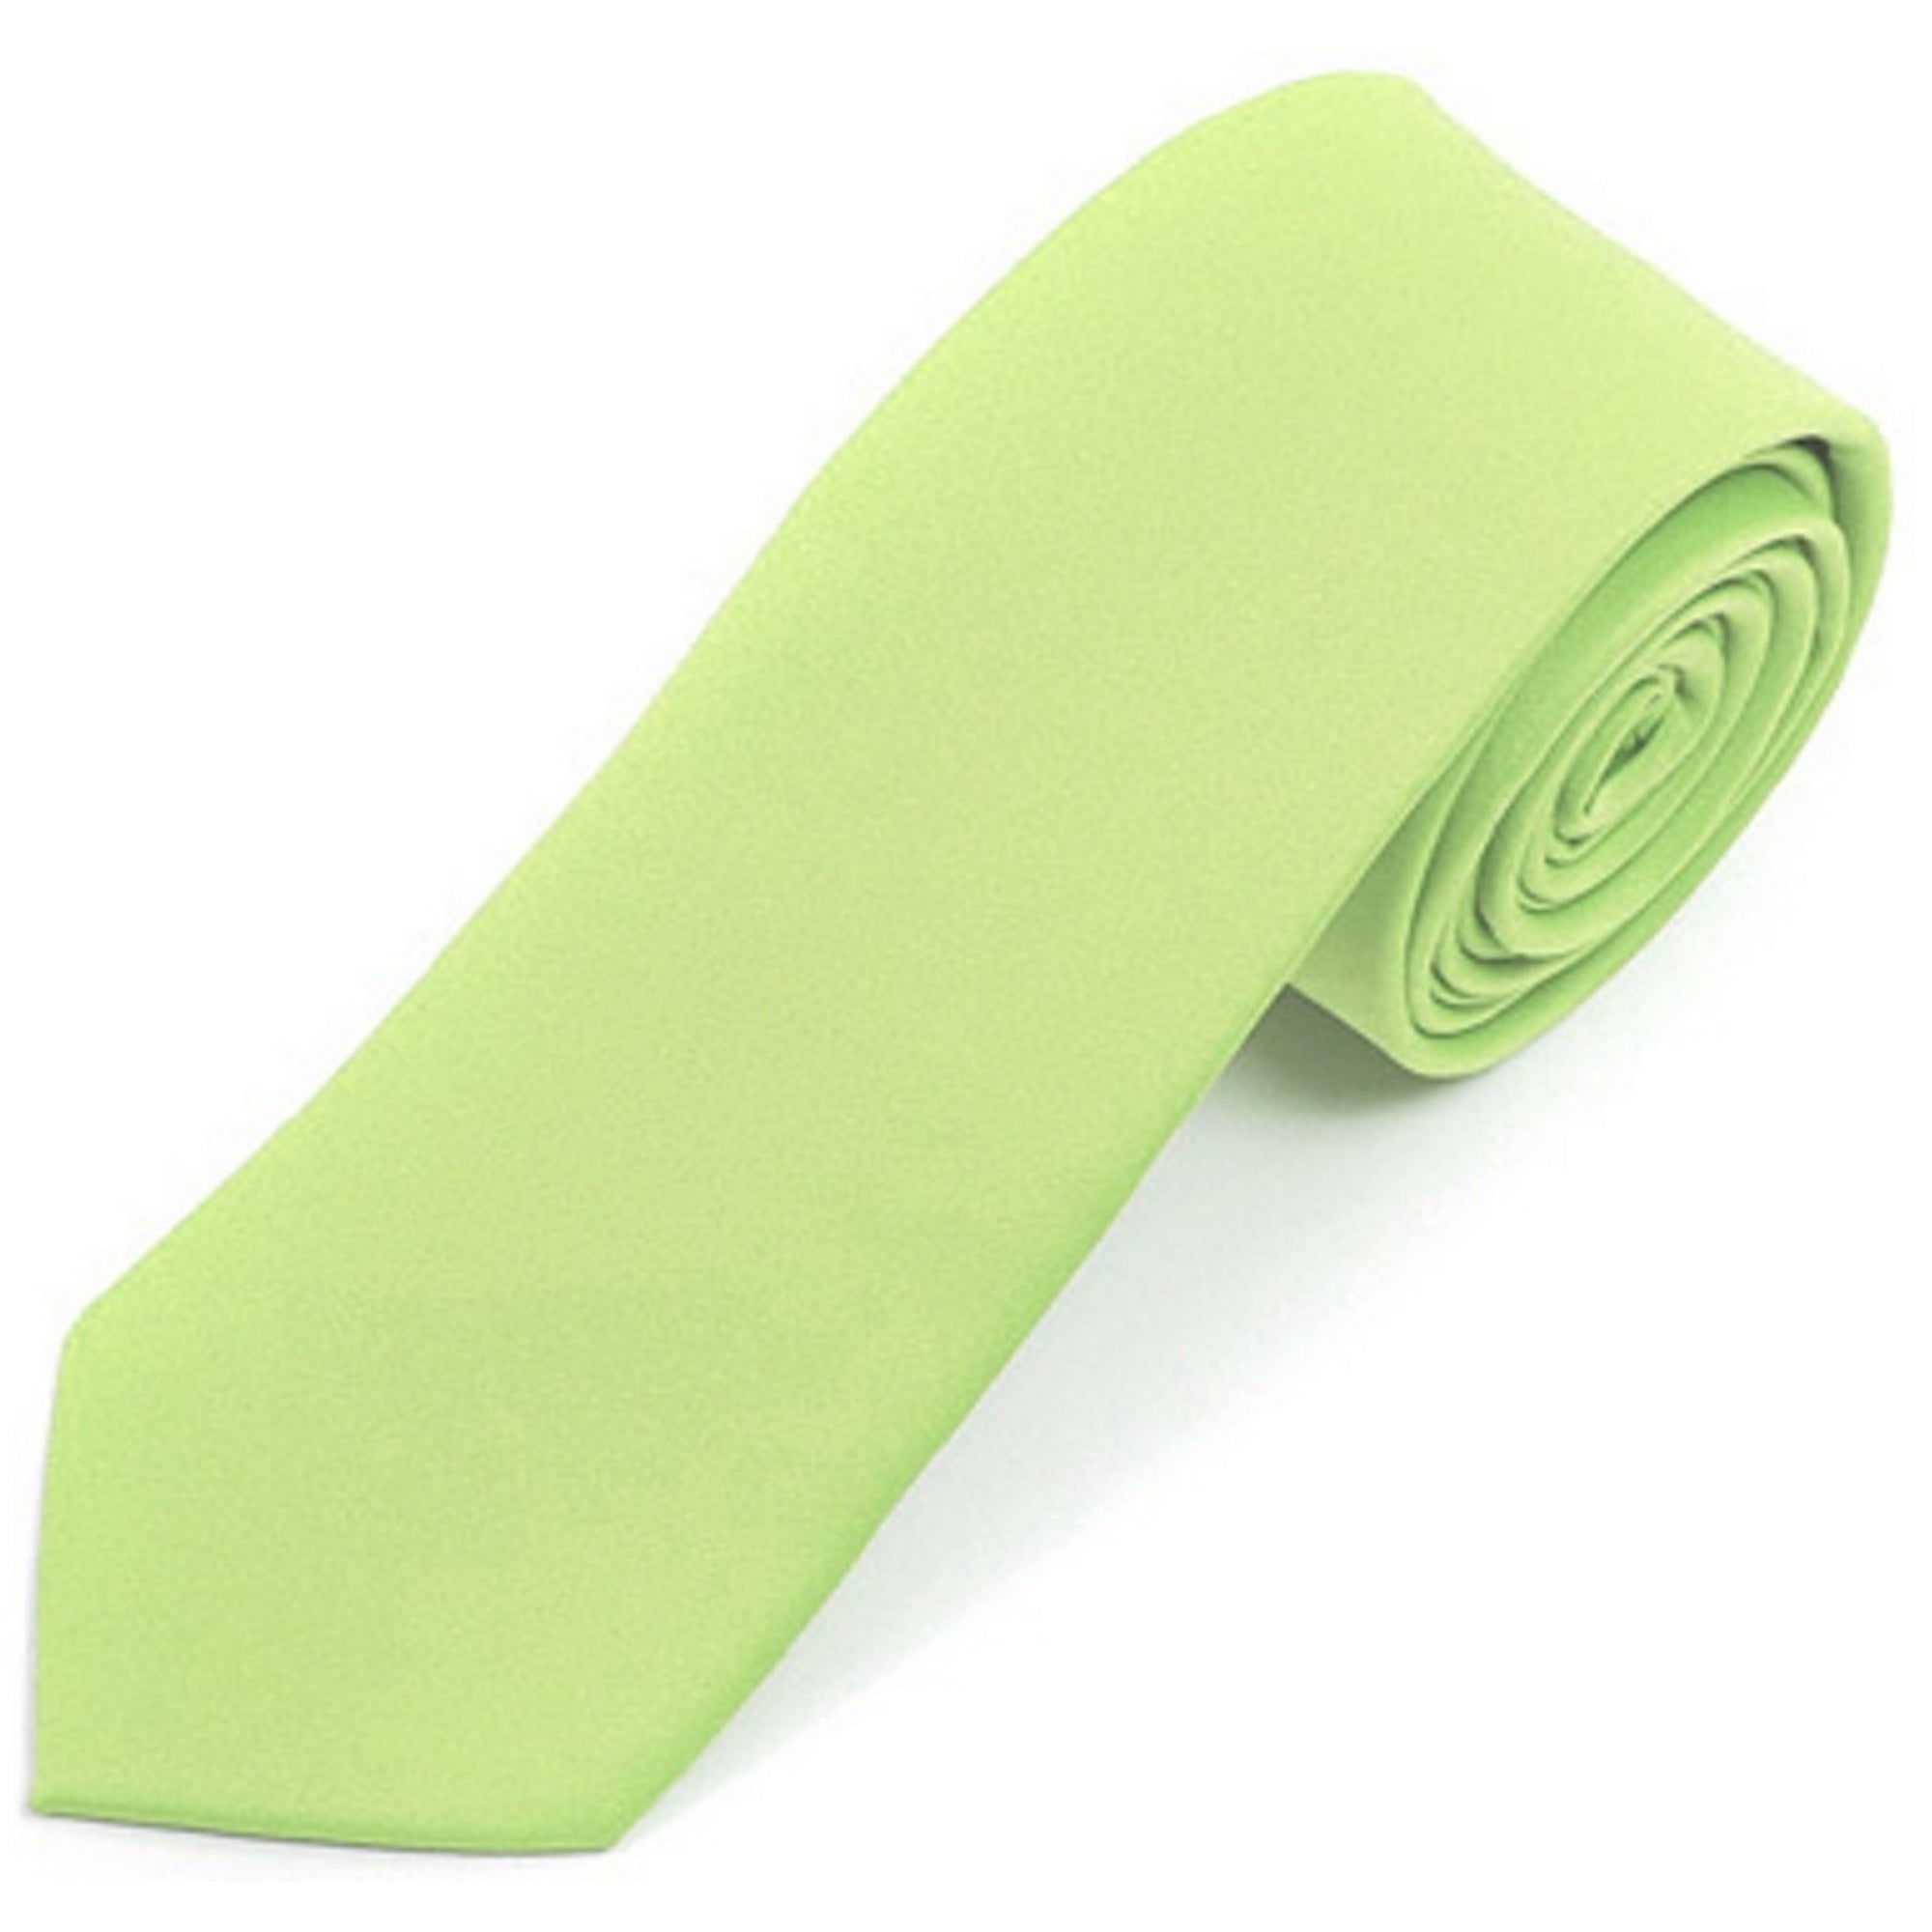 Men's Solid Color 2 Inch Wide And 57 Inch Long Slim Neckties Neck Tie TheDapperTie Lime 57" long and 2" wide 